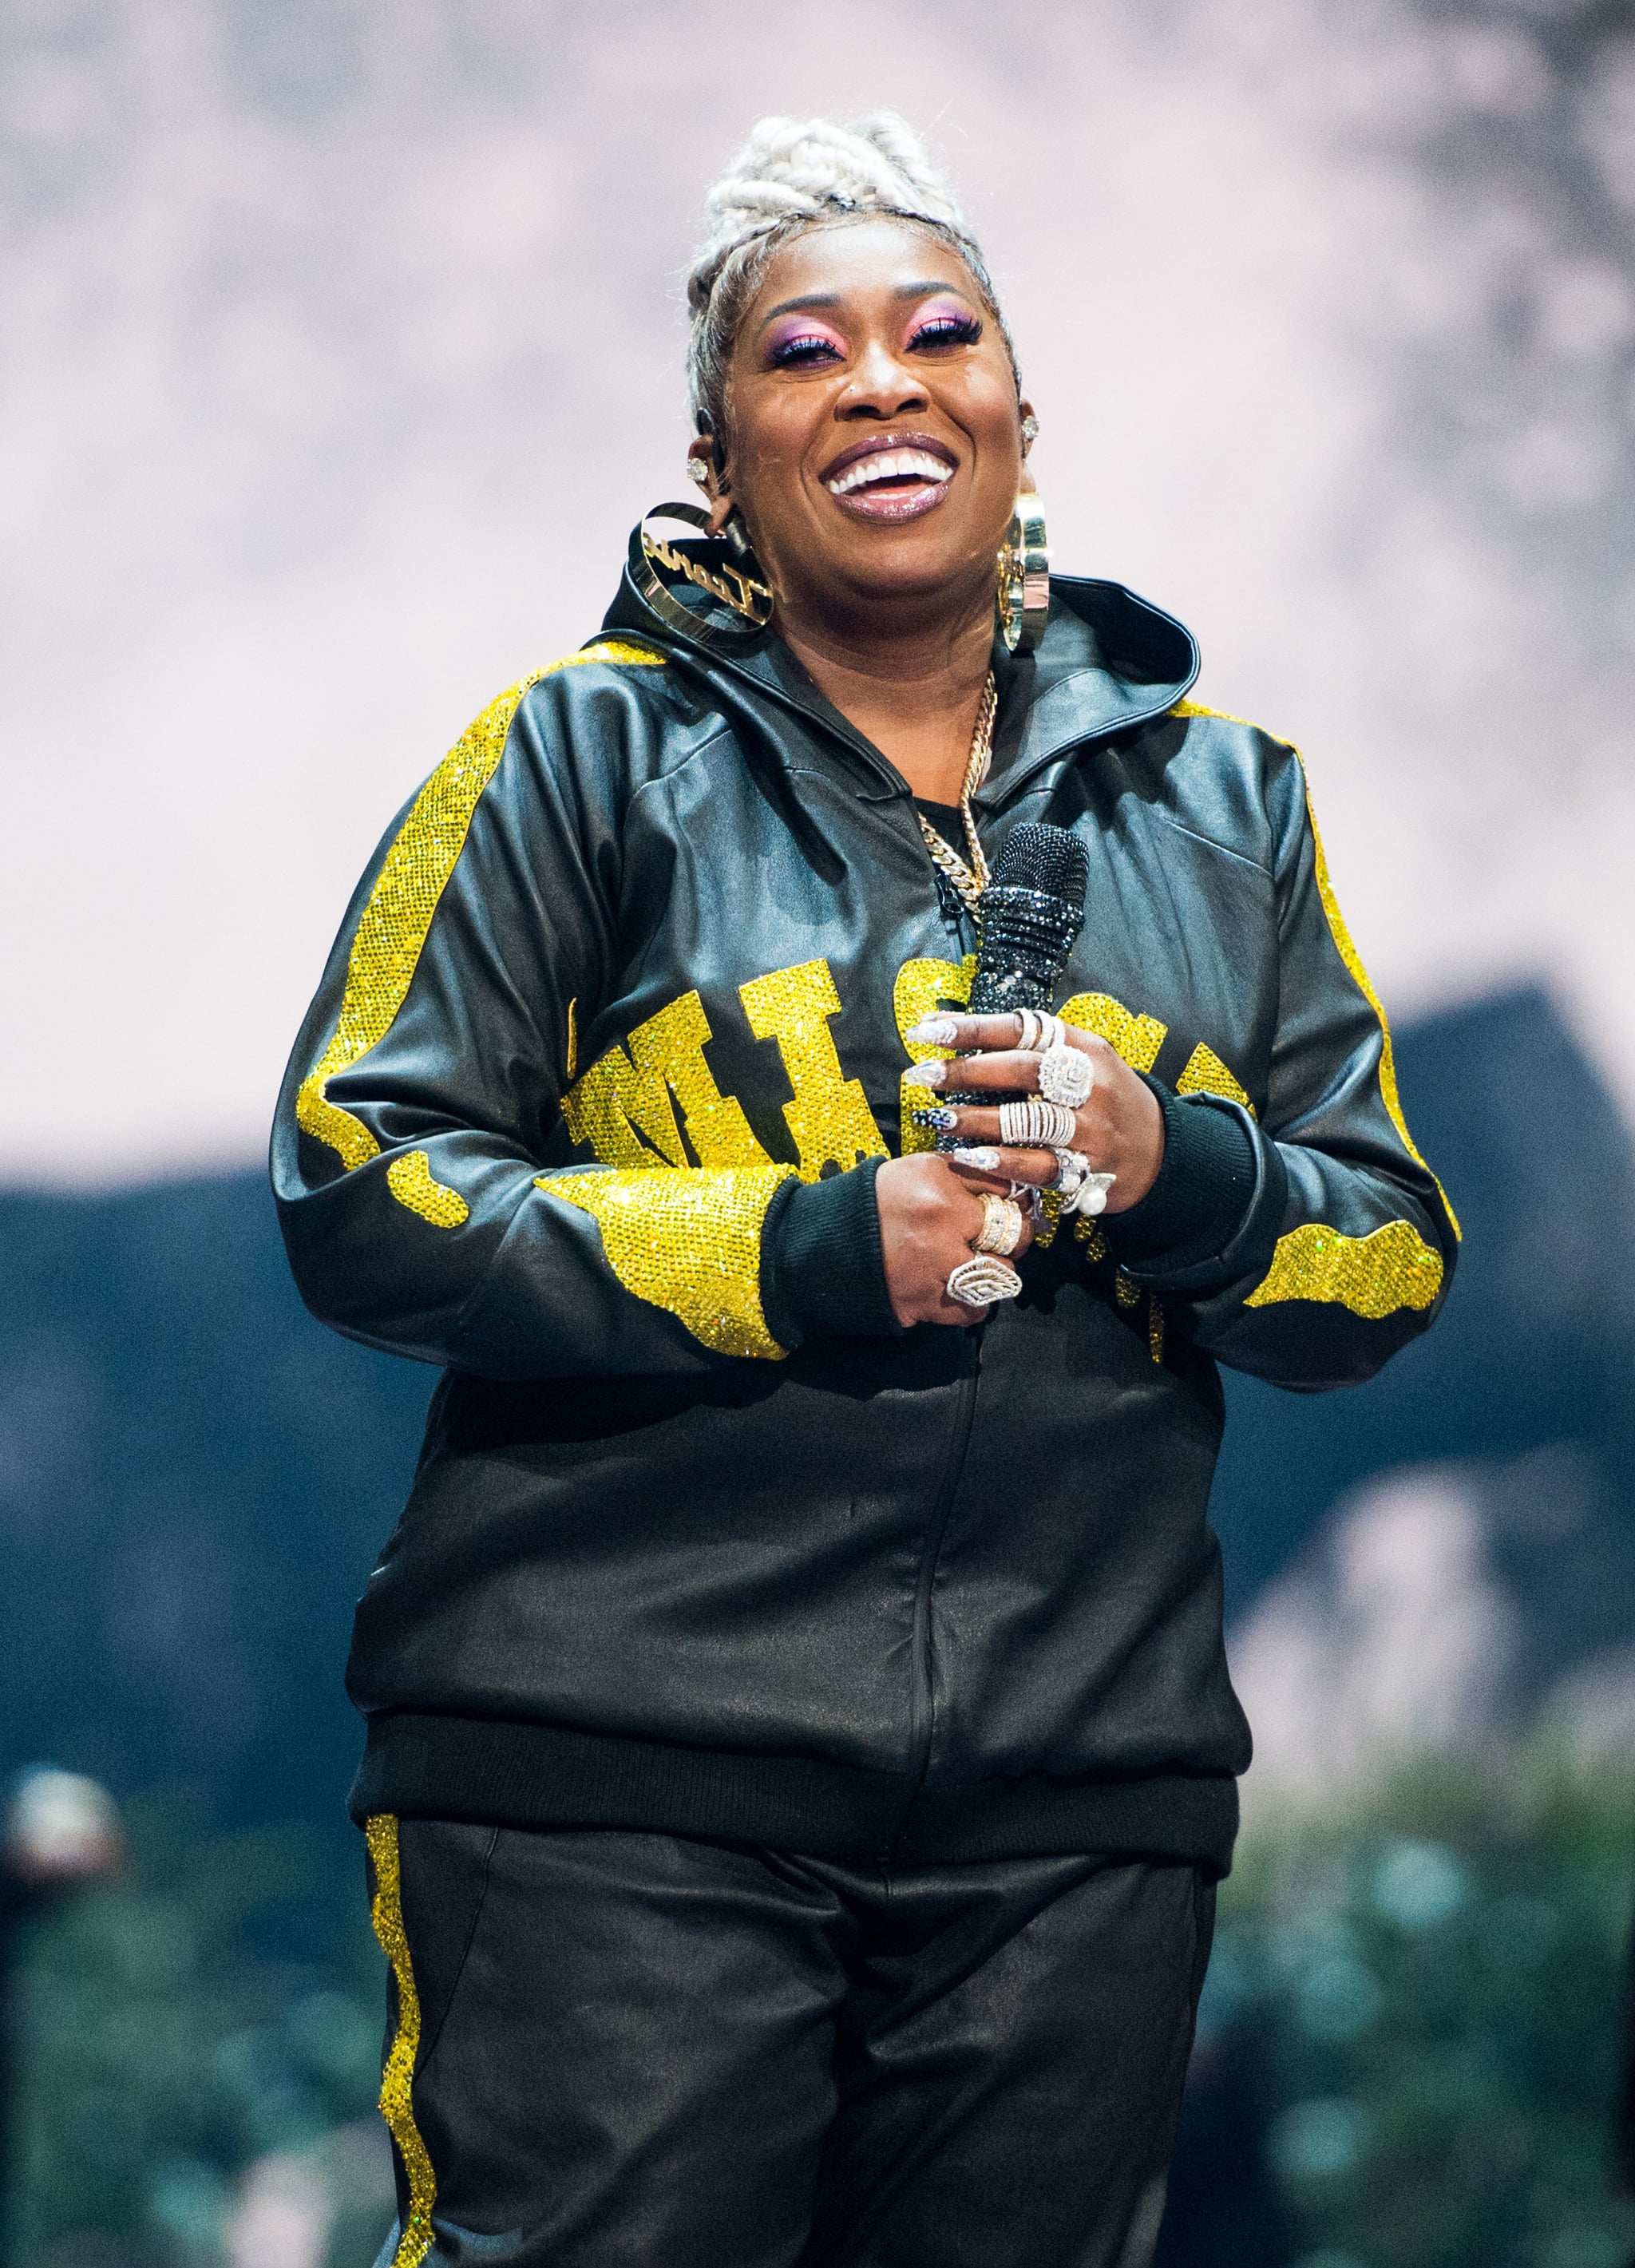 NEWARK, NEW JERSEY - AUGUST 26: Missy Elliott performs onstage during the 2019 MTV Video Music Awards at Prudential Centre on August 26, 2019 in Newark, New Jersey. (Photo by John Shearer/Getty Images)